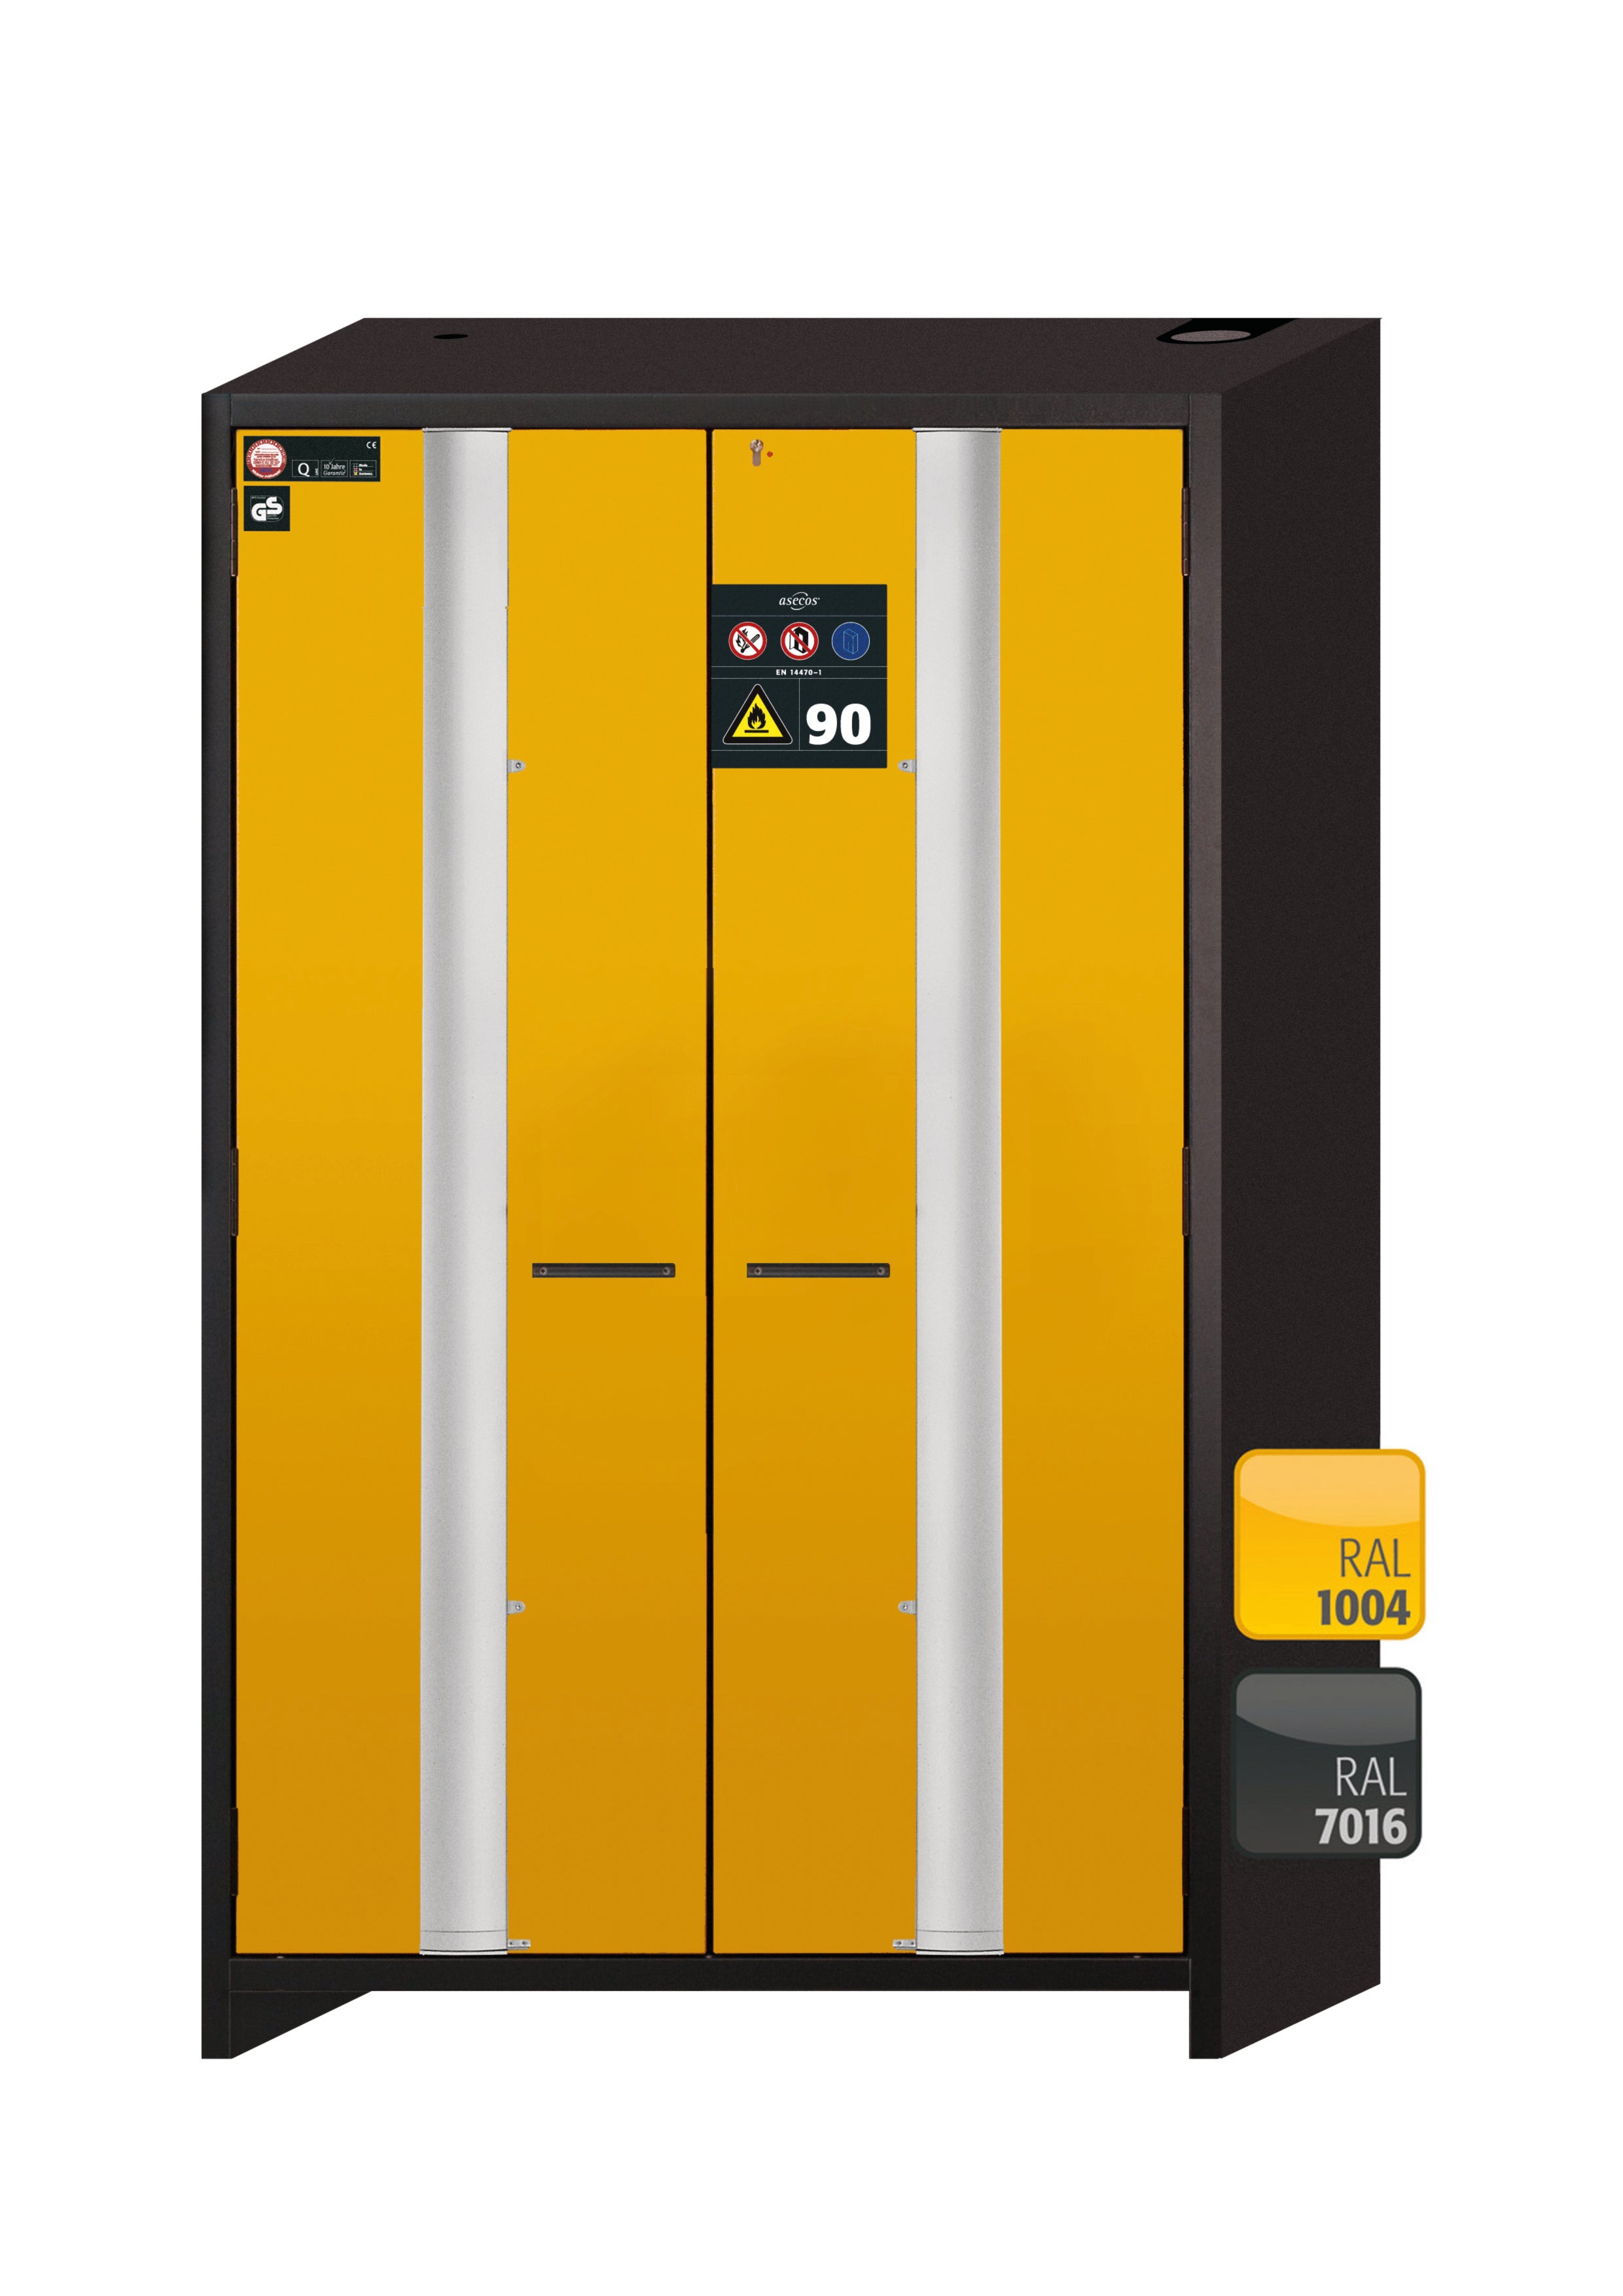 Type 90 safety cabinet Q-PHOENIX-90 model Q90.195.120.FD in safety yellow RAL 1004 with 6x standard pull-out tray (stainless steel 1.4301)